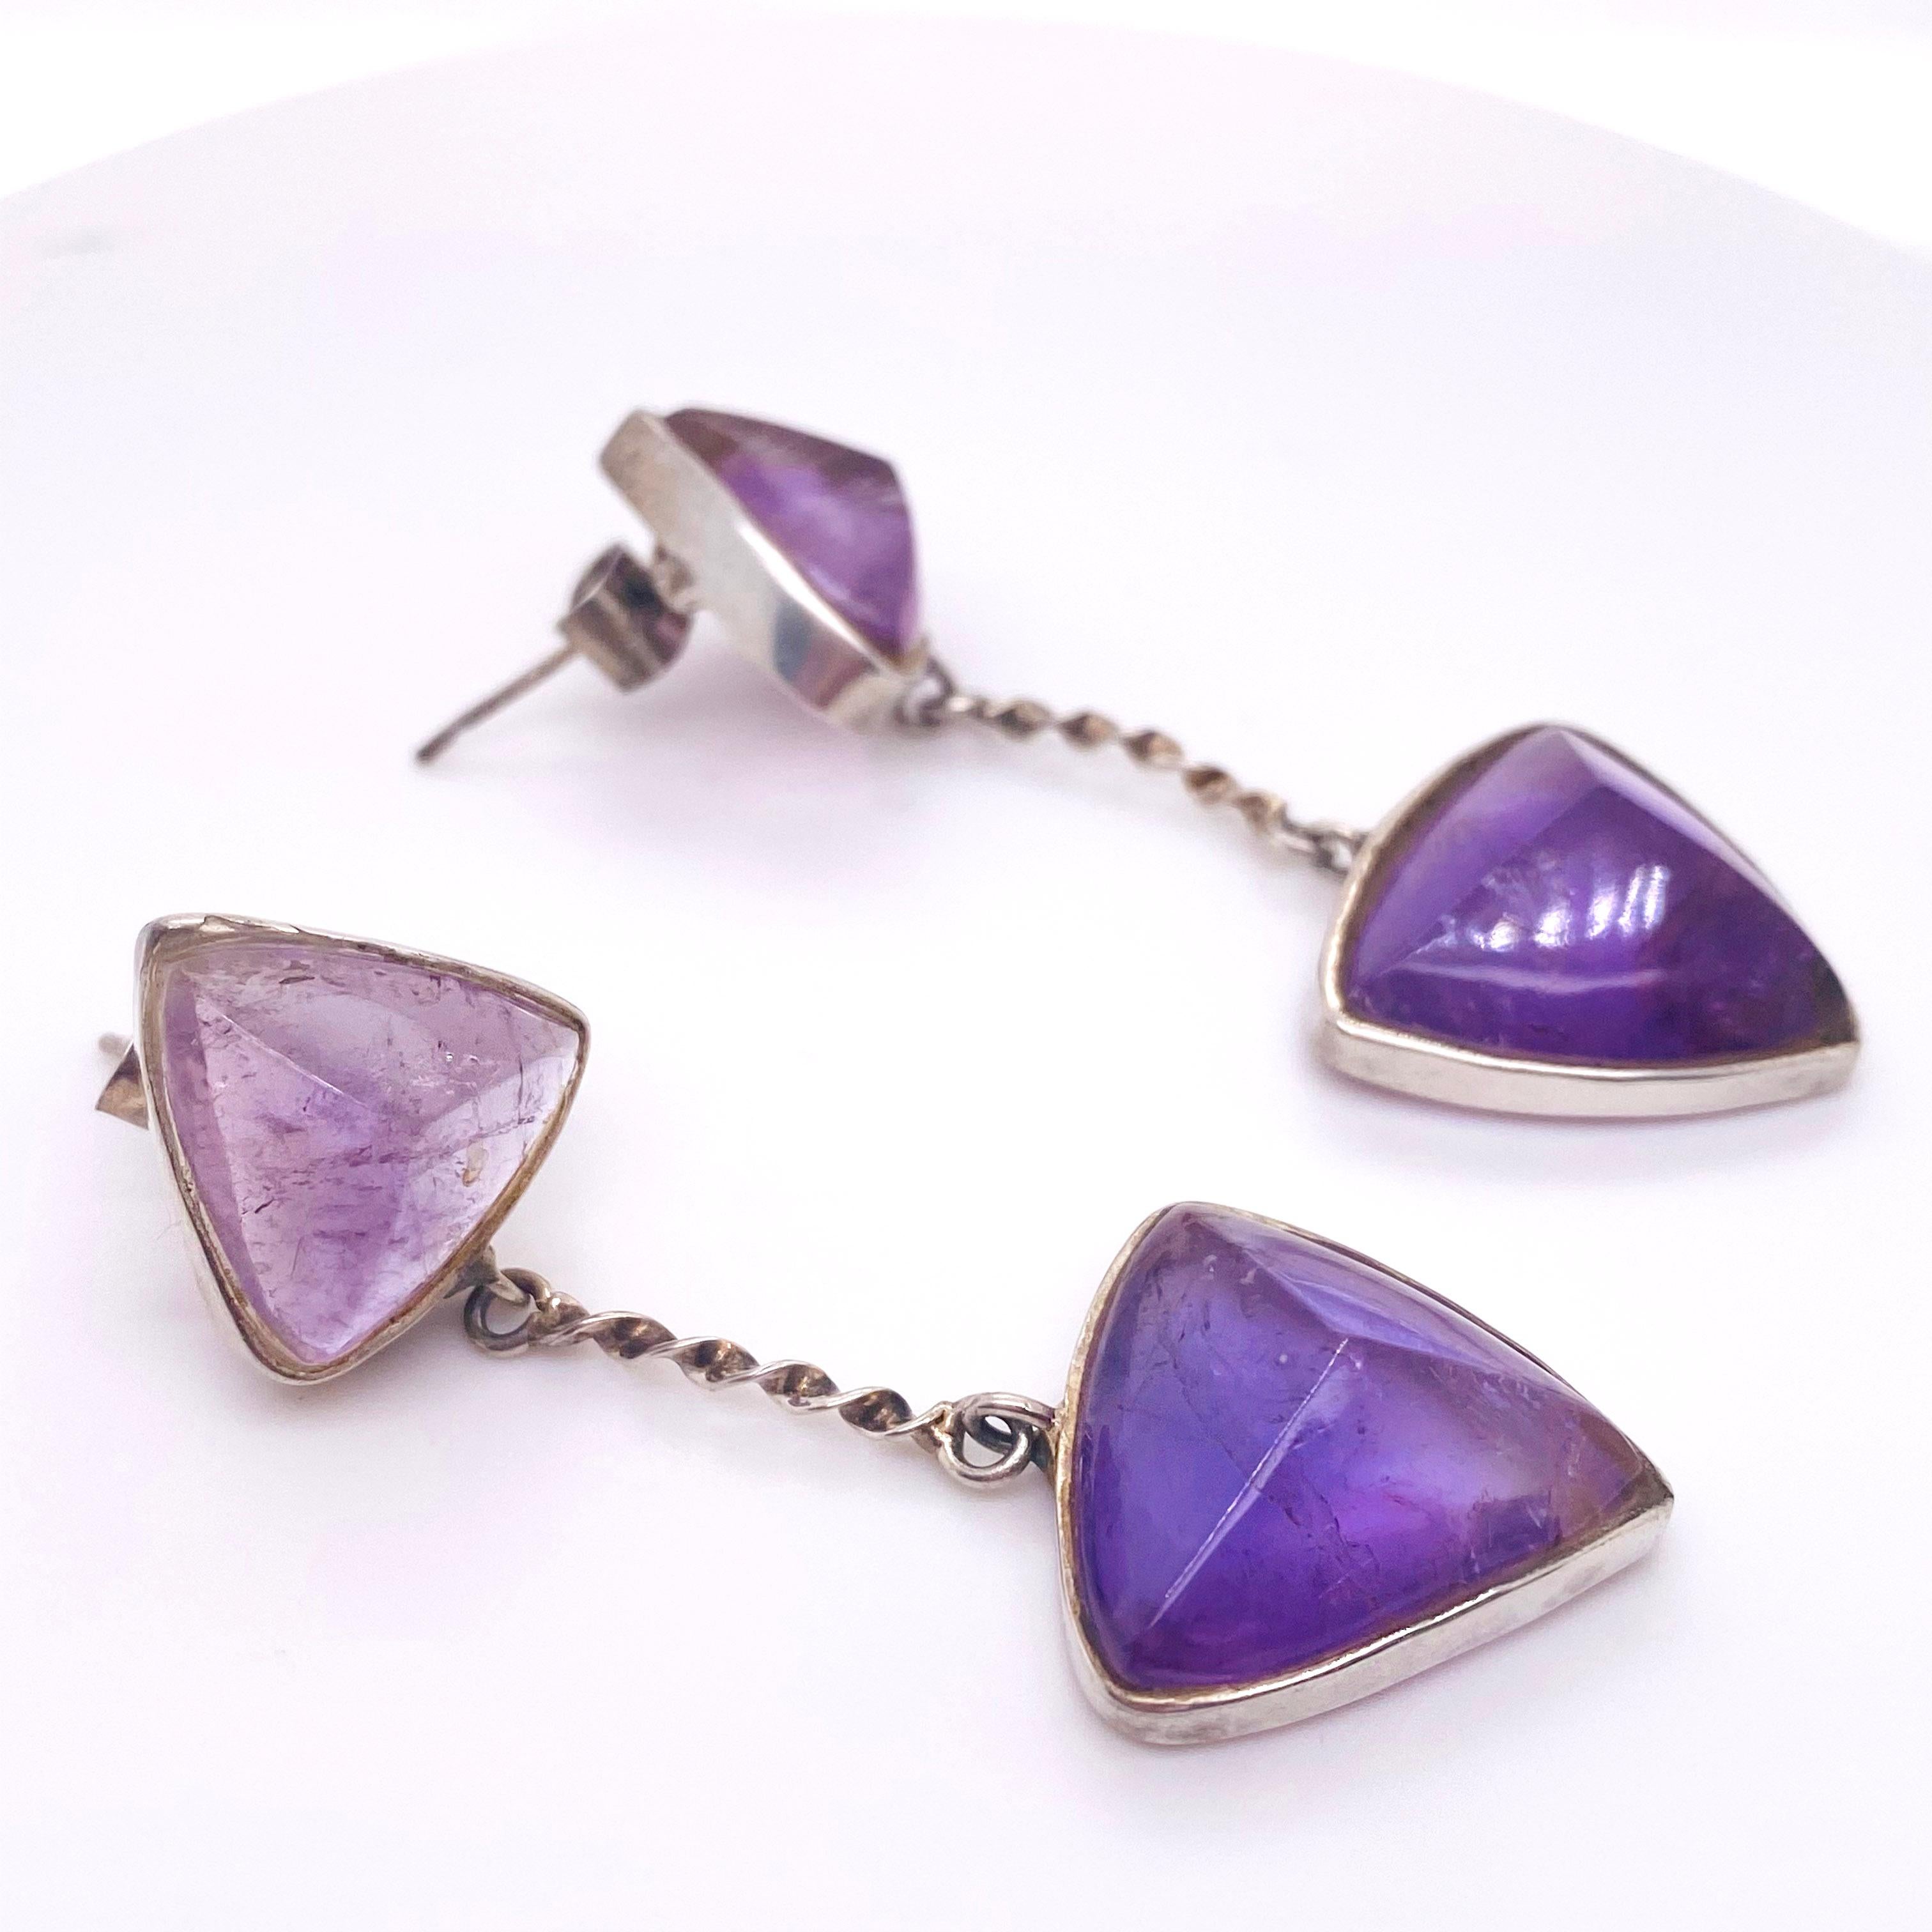 These amethyst were hand picked by the owner and our shop made these beautiful earrings. The amethysts are slightly pointed triangle cabochons in handmade sterling silver bezels and twisted wire dangles. The earrings have two gorgeous amethysts on